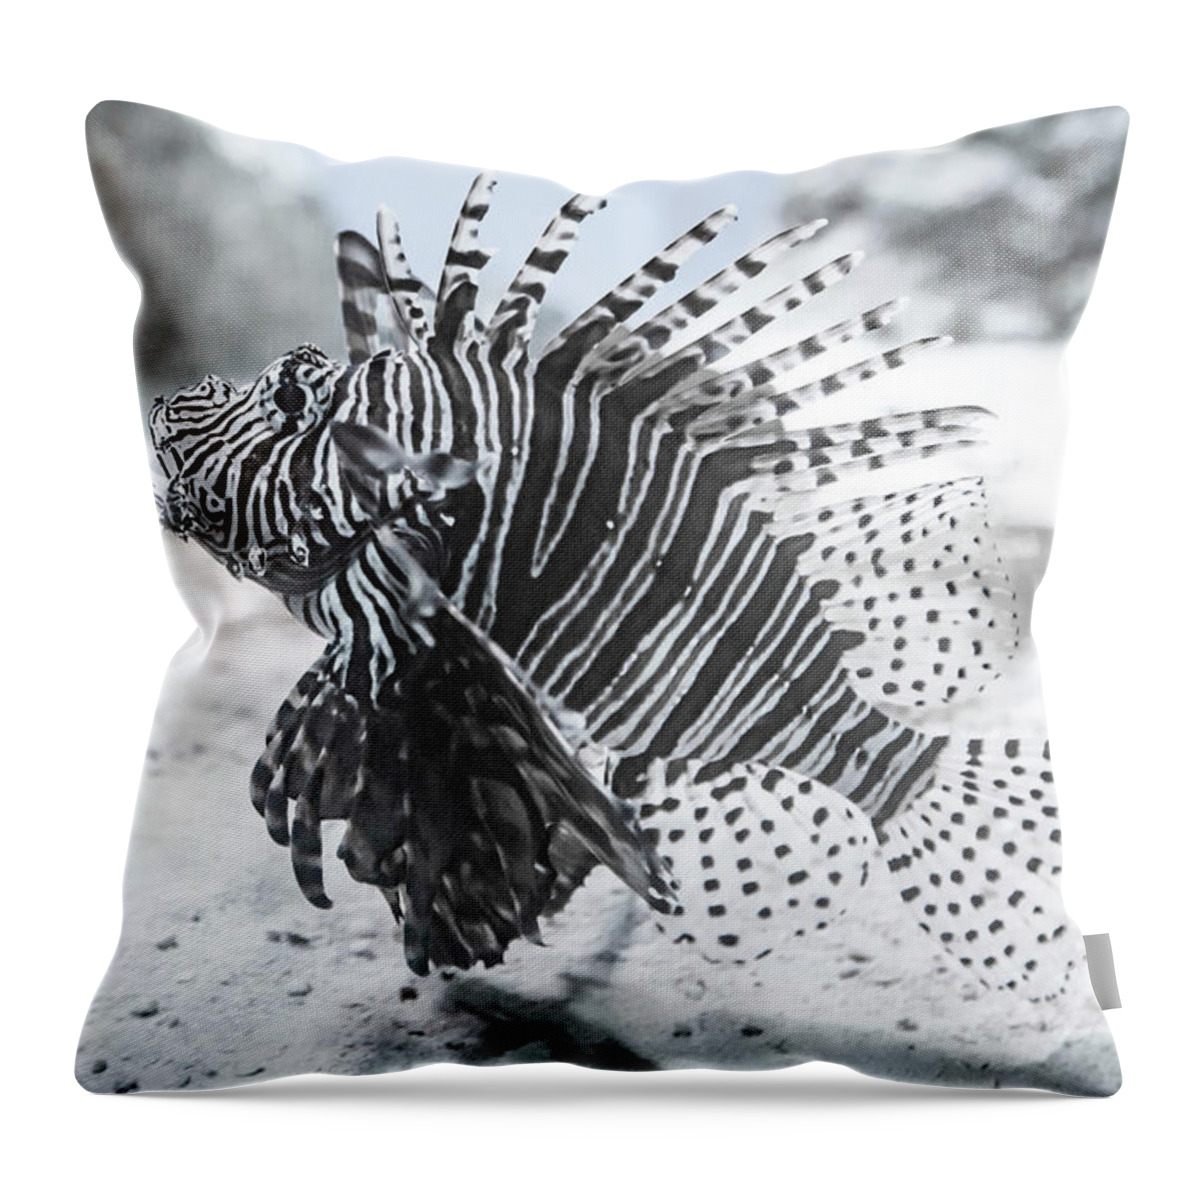 Lion Throw Pillow featuring the photograph The Lion by Betsy Knapp